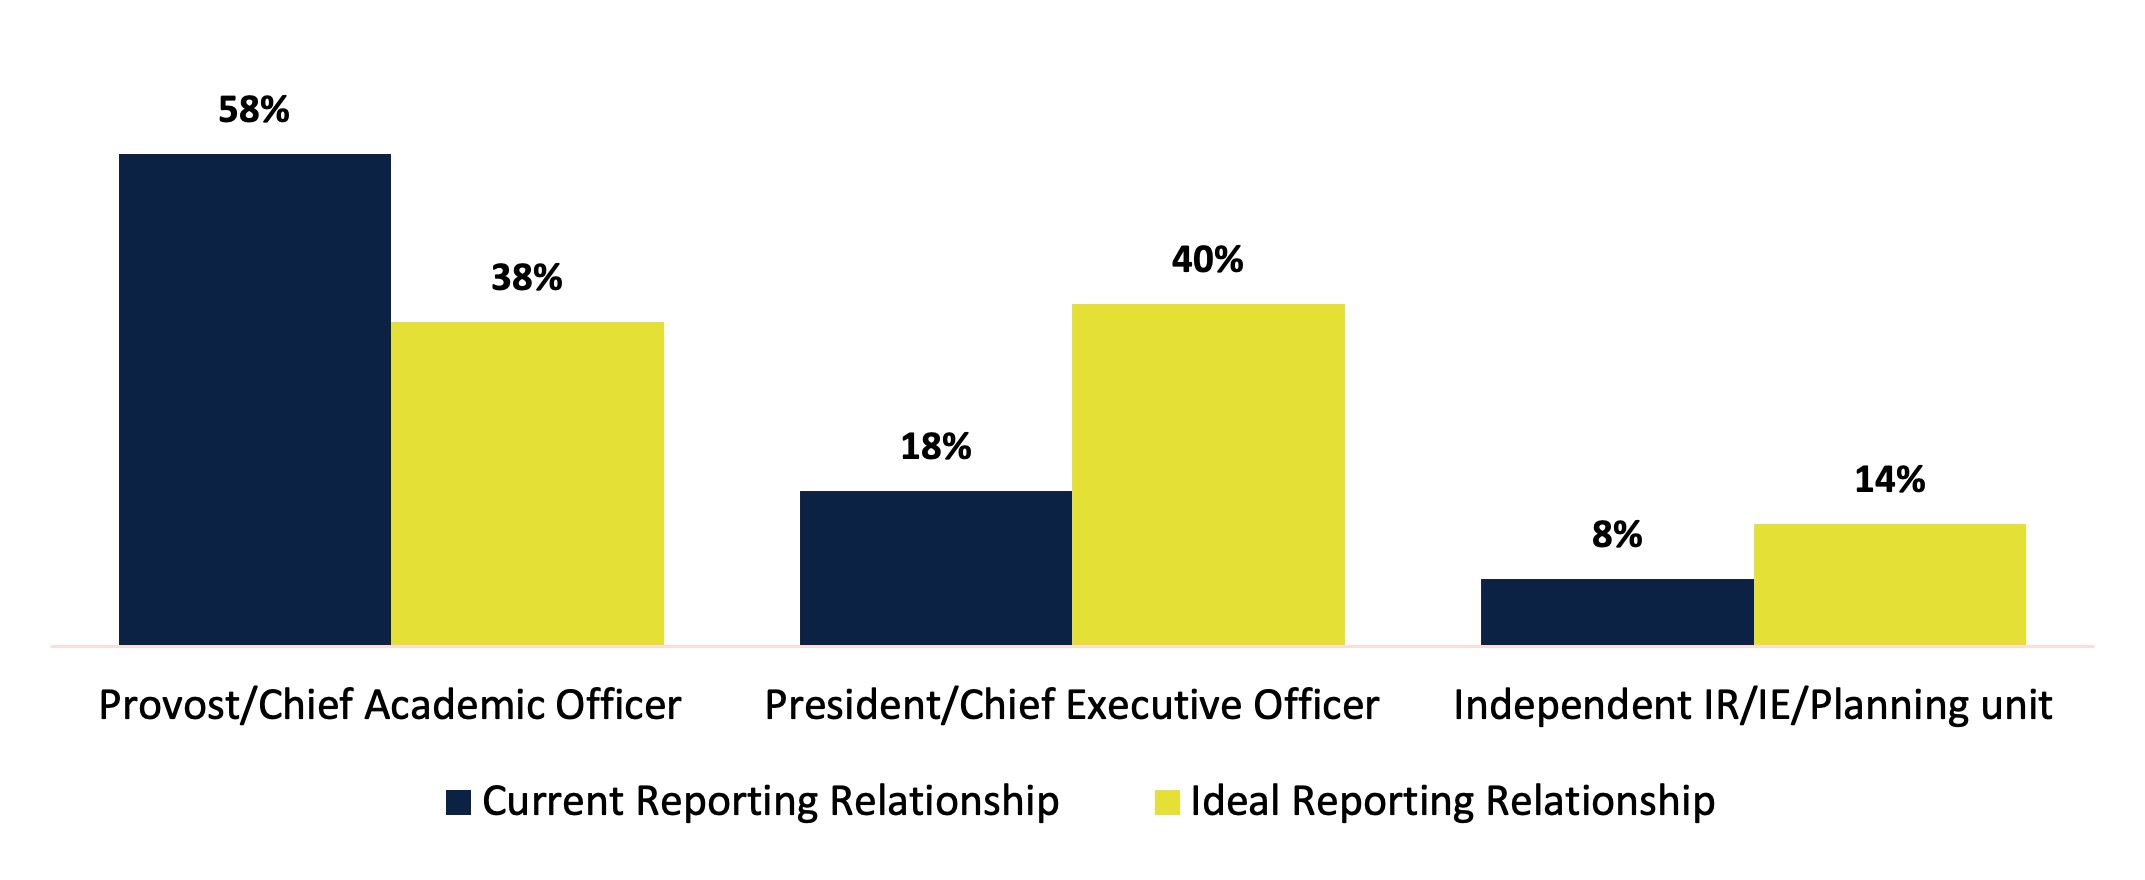 Chart 3. Current vs. Ideal Reporting Relationship